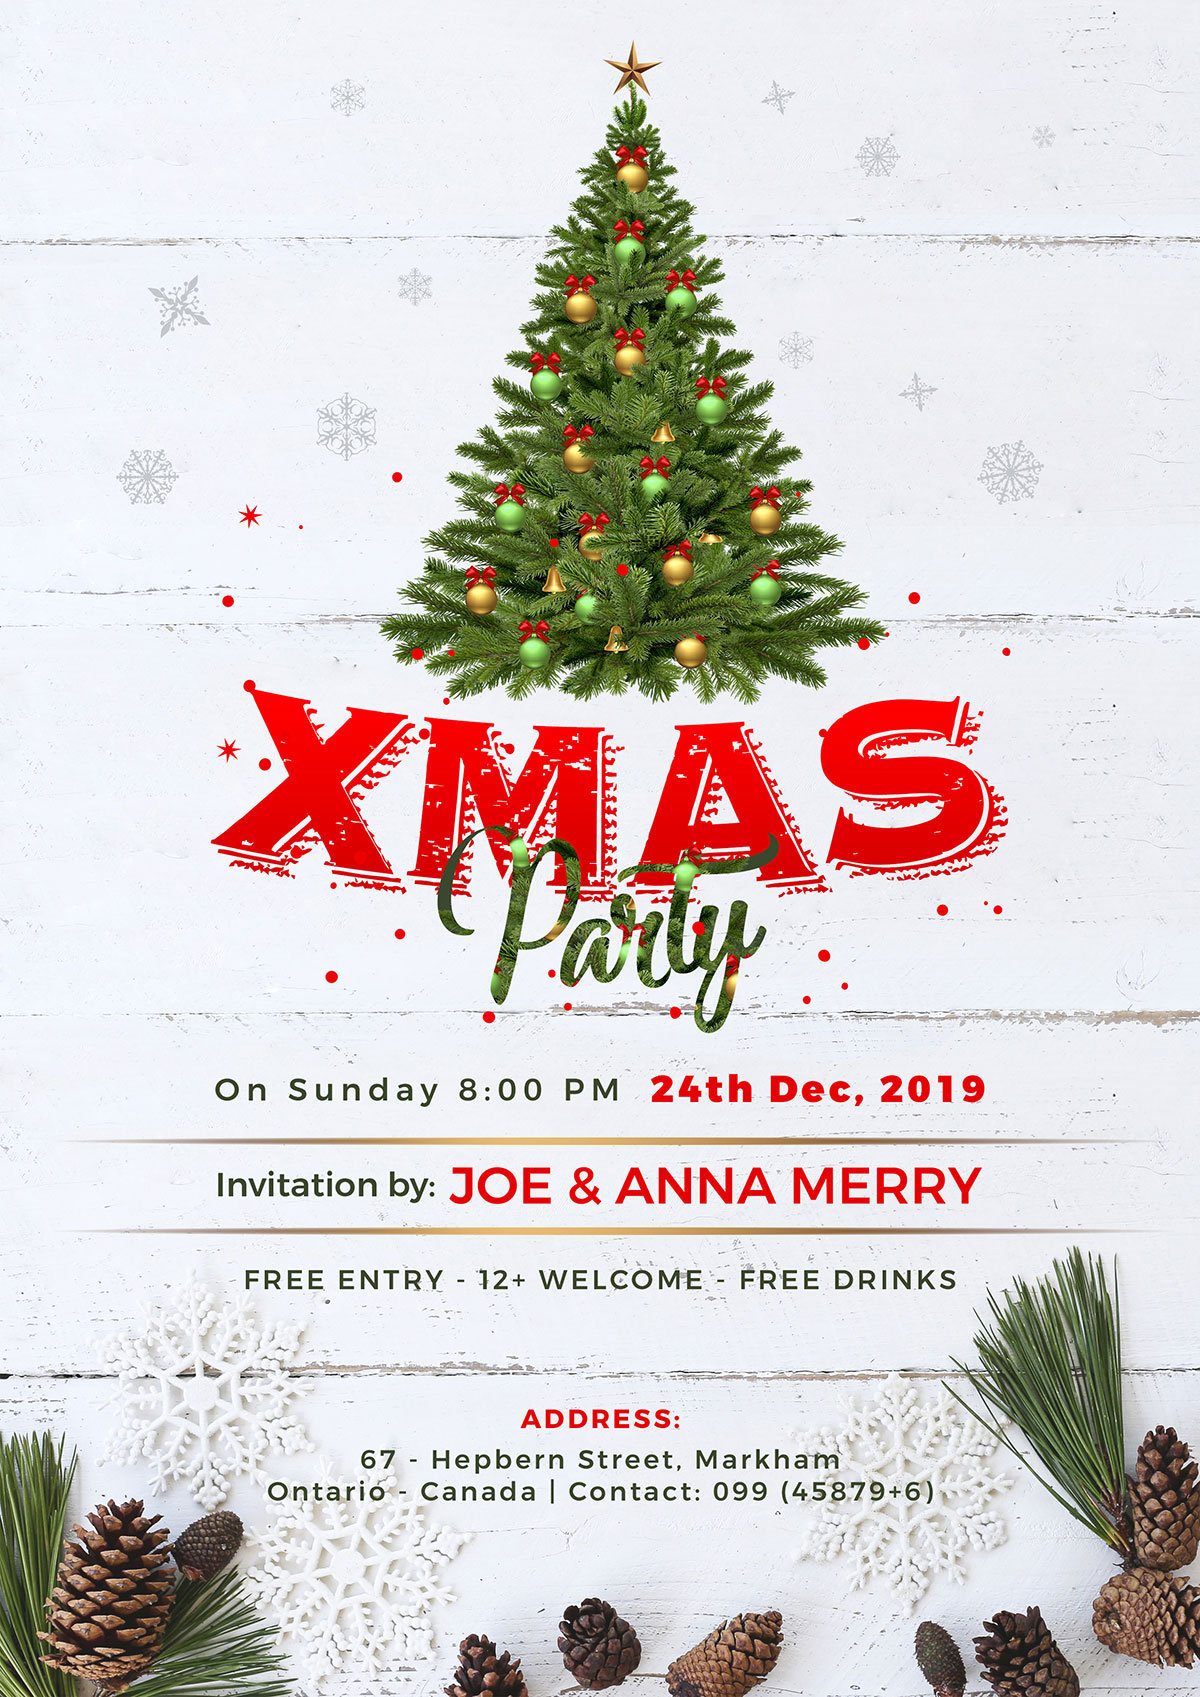 Free Christmas Party Flyer Design Template 2019 in PSD Format Designbolts